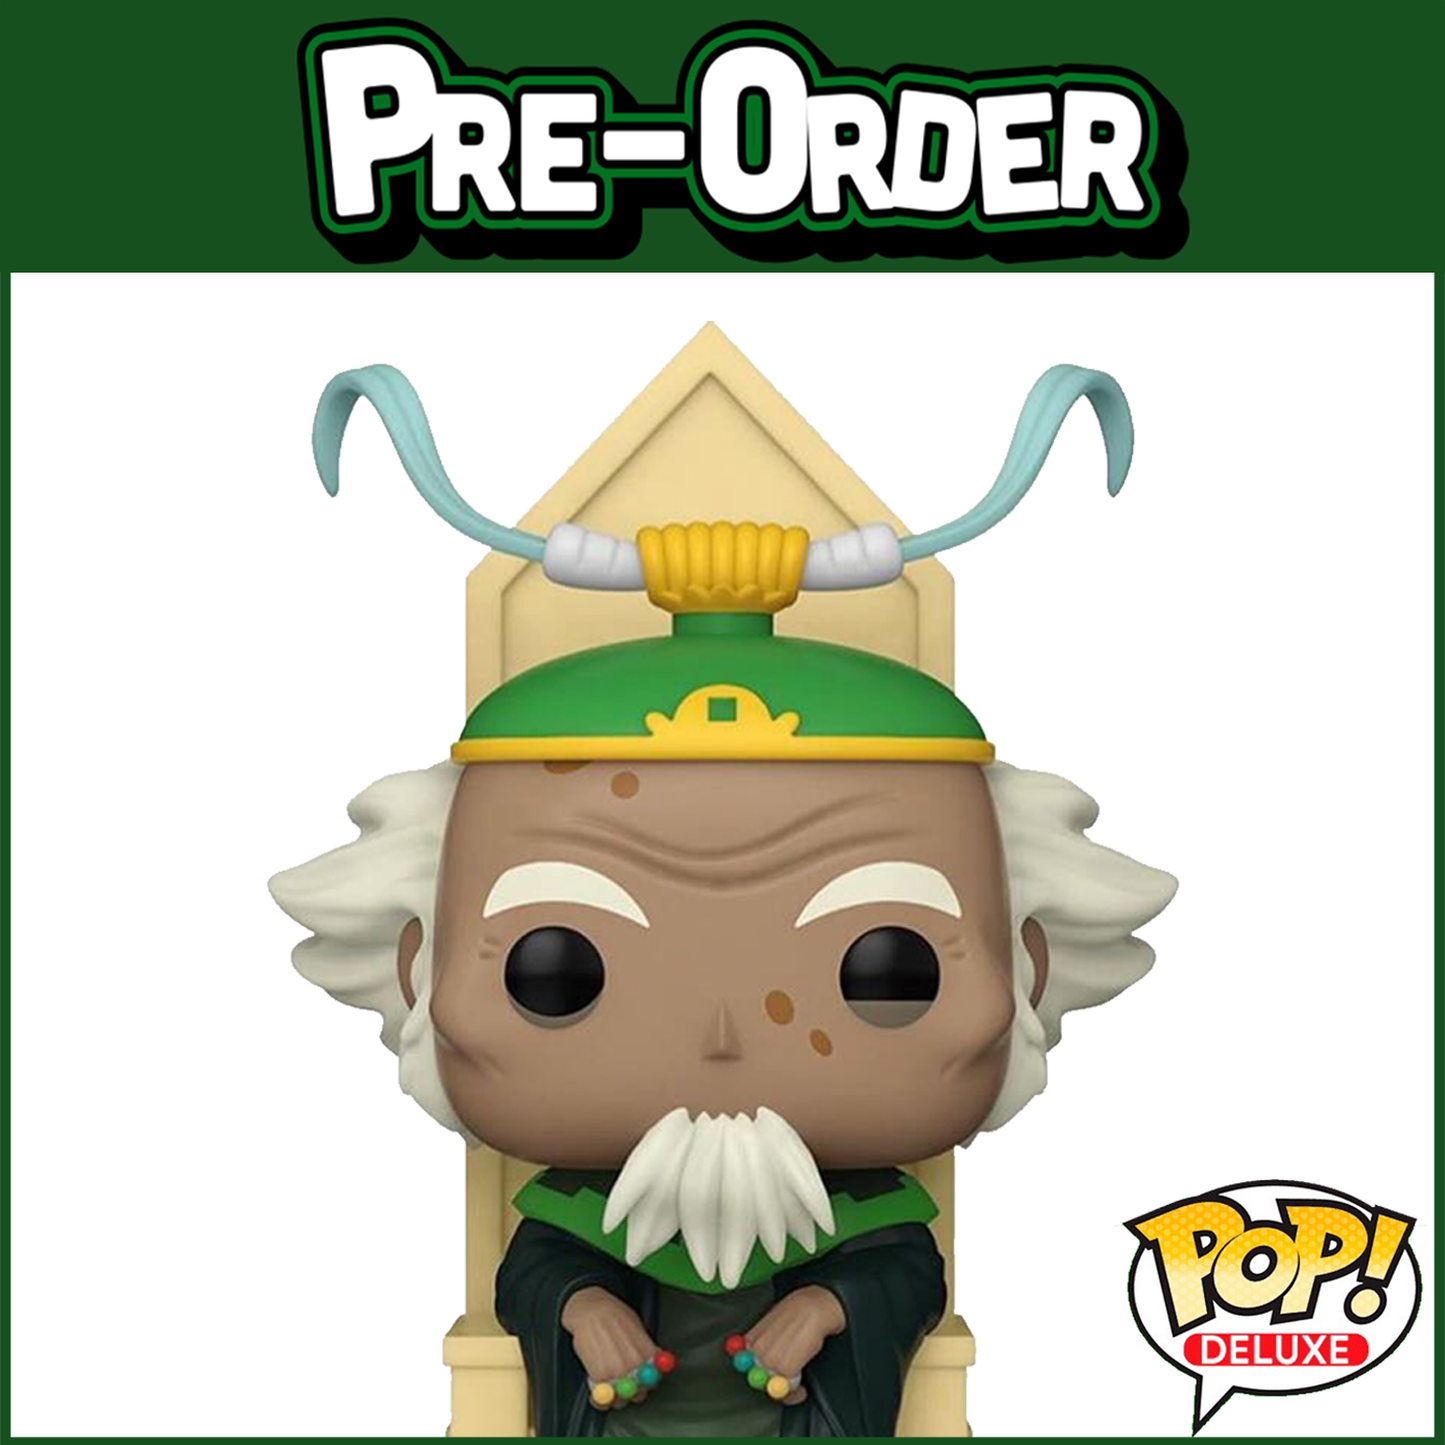 (PRE-ORDER) Funko POP! Deluxe: Avatar The Last Airbender - King Bumi #1444